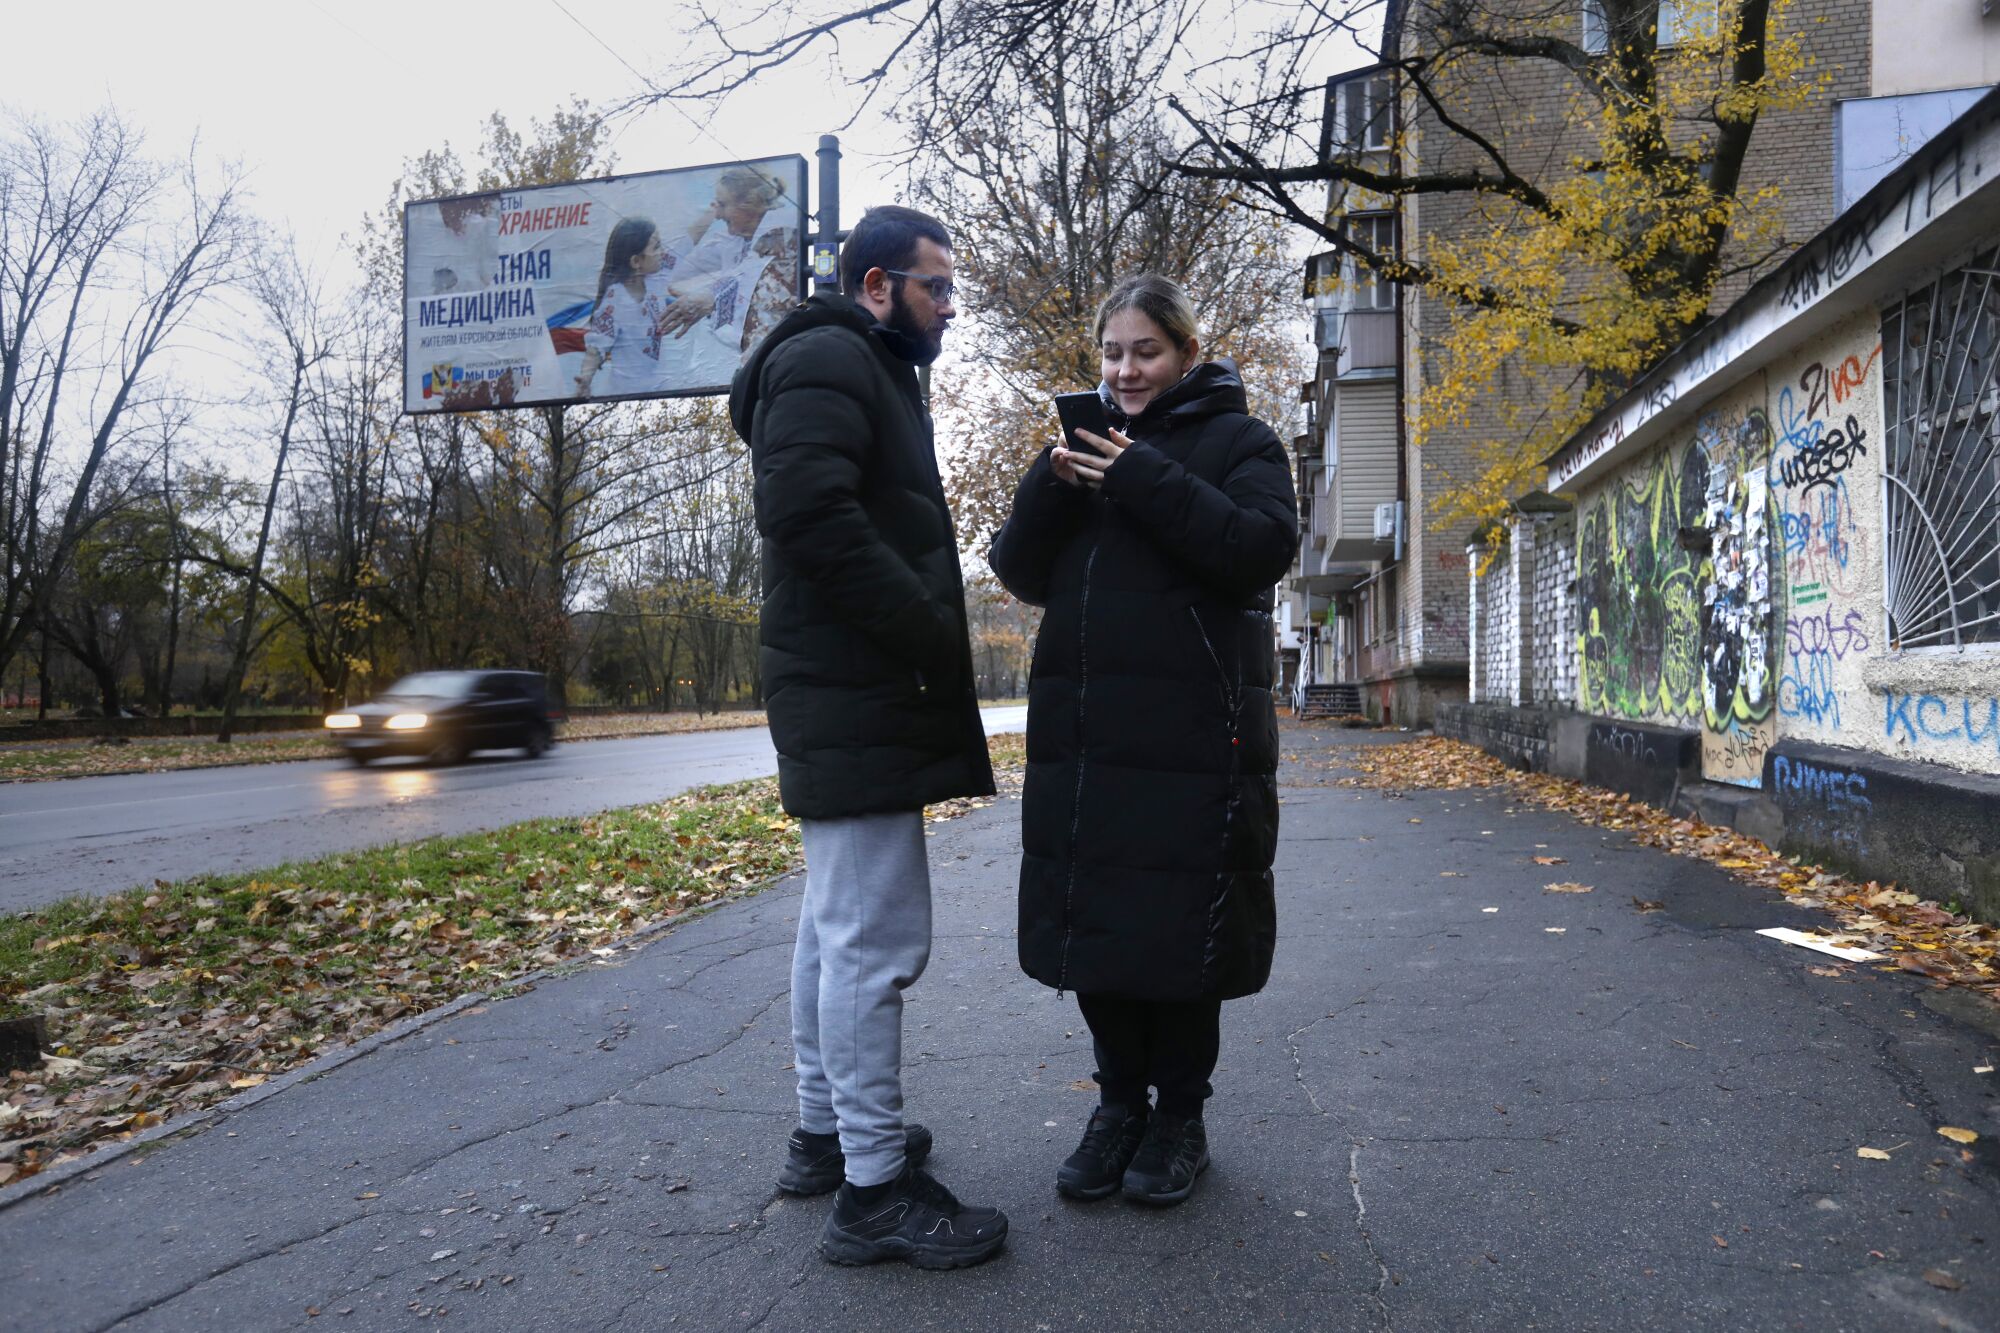 A bearded man, left, and a woman holding a cell phone, both in dark winter jackets, stand beside a road near buildings 